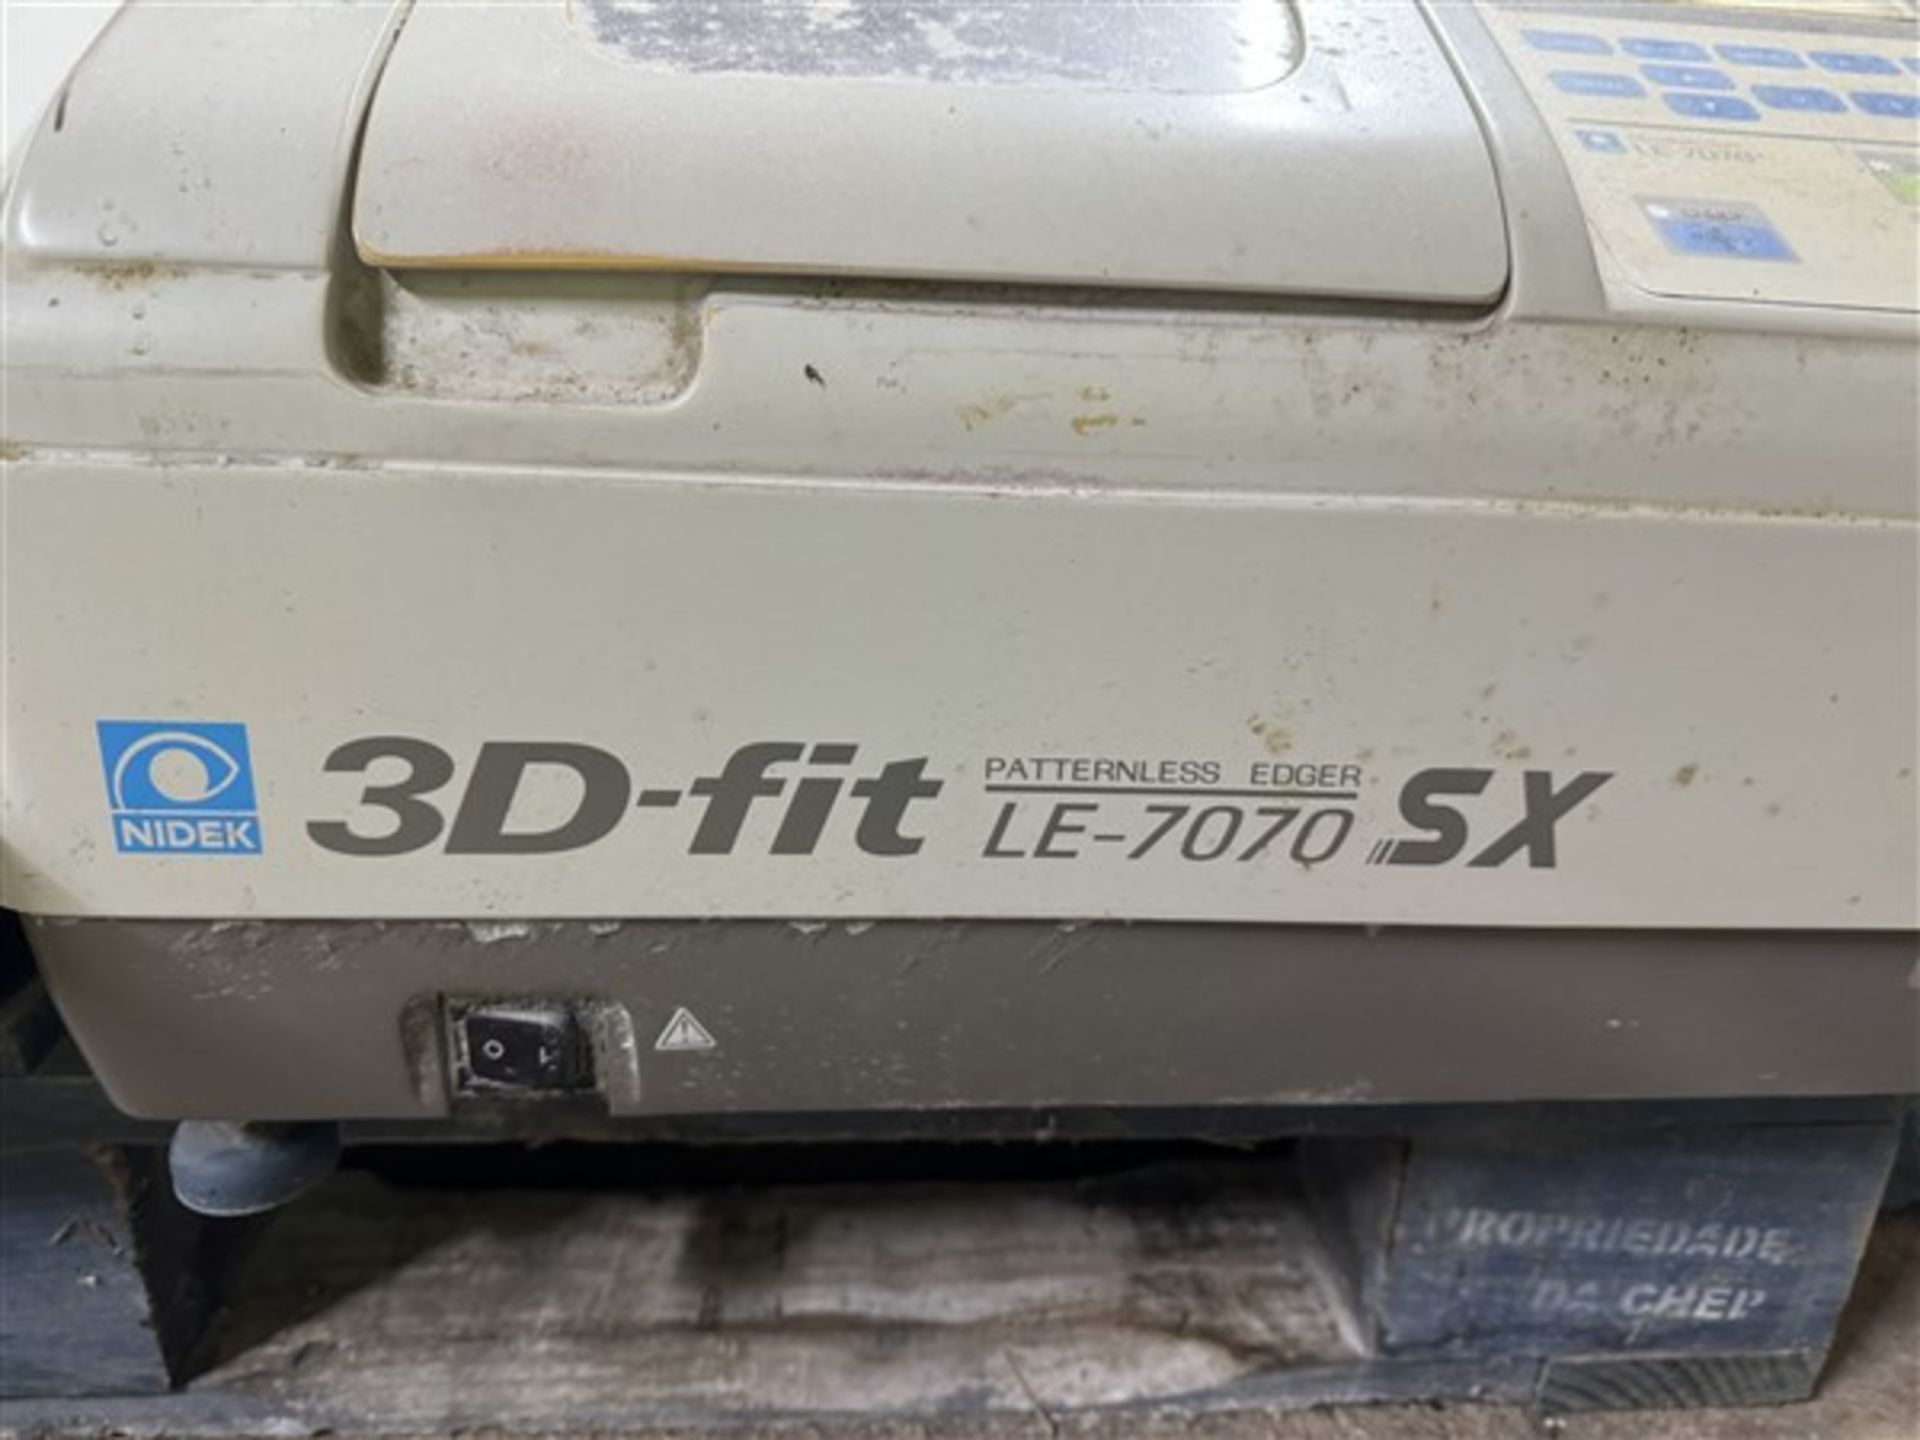 Nidek 3D-Fit patternless edger, model LE-7070 SX (Please note, this LOT is sold as spares) - Image 2 of 5